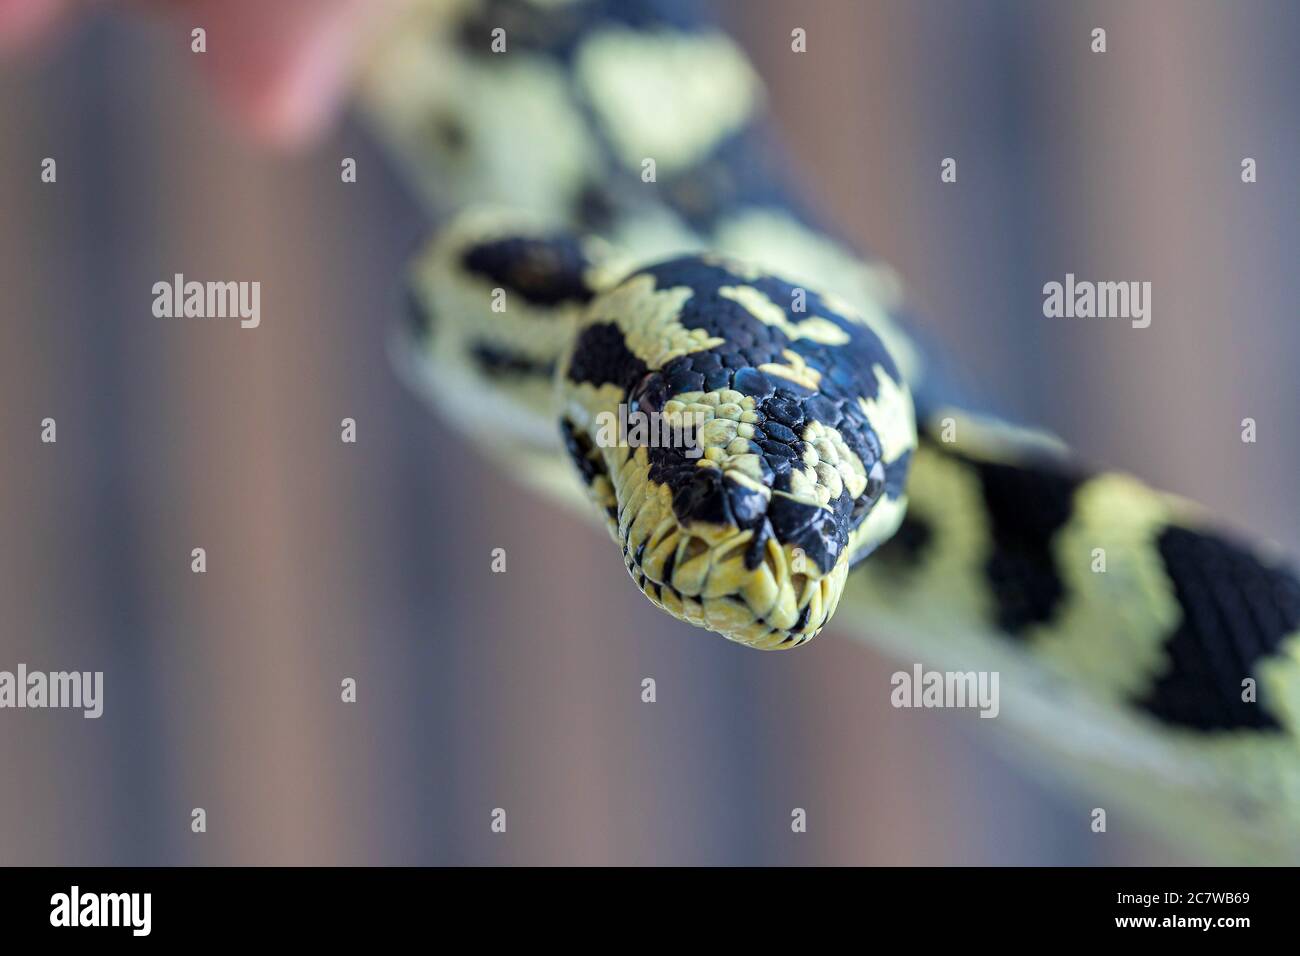 Black and yellow snake looking at the camera on blurred background. Macro, close up. Reptile background Stock Photo